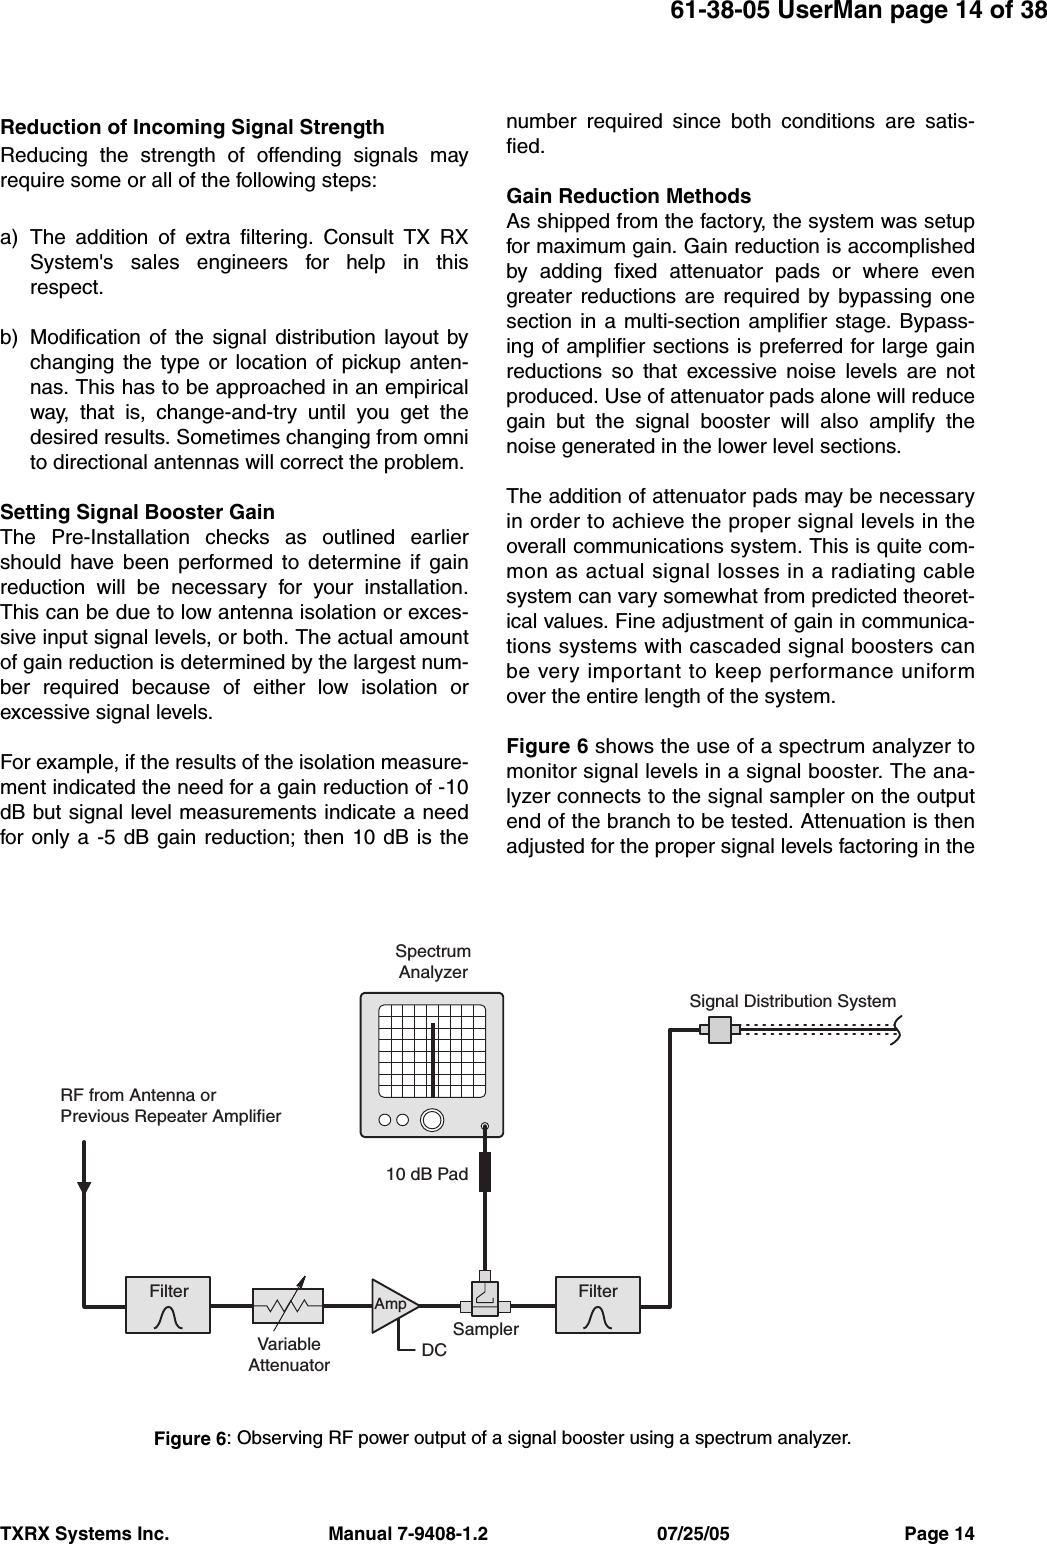 61-38-05 UserMan page 14 of 38TXRX Systems Inc.                               Manual 7-9408-1.2                                 07/25/05                                  Page 14Reduction of Incoming Signal StrengthReducing the strength of offending signals mayrequire some or all of the following steps:a) The addition of extra filtering. Consult TX RXSystem&apos;s sales engineers for help in thisrespect.b) Modification of the signal distribution layout bychanging the type or location of pickup anten-nas. This has to be approached in an empiricalway, that is, change-and-try until you get thedesired results. Sometimes changing from omnito directional antennas will correct the problem.Setting Signal Booster GainThe Pre-Installation checks as outlined earliershould have been performed to determine if gainreduction will be necessary for your installation.This can be due to low antenna isolation or exces-sive input signal levels, or both. The actual amountof gain reduction is determined by the largest num-ber required because of either low isolation orexcessive signal levels.For example, if the results of the isolation measure-ment indicated the need for a gain reduction of -10dB but signal level measurements indicate a needfor only a -5 dB gain reduction; then 10 dB is thenumber required since both conditions are satis-fied.Gain Reduction MethodsAs shipped from the factory, the system was setupfor maximum gain. Gain reduction is accomplishedby adding fixed attenuator pads or where evengreater reductions are required by bypassing onesection in a multi-section amplifier stage. Bypass-ing of amplifier sections is preferred for large gainreductions so that excessive noise levels are notproduced. Use of attenuator pads alone will reducegain but the signal booster will also amplify thenoise generated in the lower level sections.The addition of attenuator pads may be necessaryin order to achieve the proper signal levels in theoverall communications system. This is quite com-mon as actual signal losses in a radiating cablesystem can vary somewhat from predicted theoret-ical values. Fine adjustment of gain in communica-tions systems with cascaded signal boosters canbe very important to keep performance uniformover the entire length of the system.Figure 6 shows the use of a spectrum analyzer tomonitor signal levels in a signal booster. The ana-lyzer connects to the signal sampler on the outputend of the branch to be tested. Attenuation is thenadjusted for the proper signal levels factoring in theRF from Antenna orPrevious Repeater AmplifierSignal Distribution SystemFilterFilterDCSamplerVariableAttenuatorSpectrumAnalyzer10 dB PadAmpFigure 6: Observing RF power output of a signal booster using a spectrum analyzer.